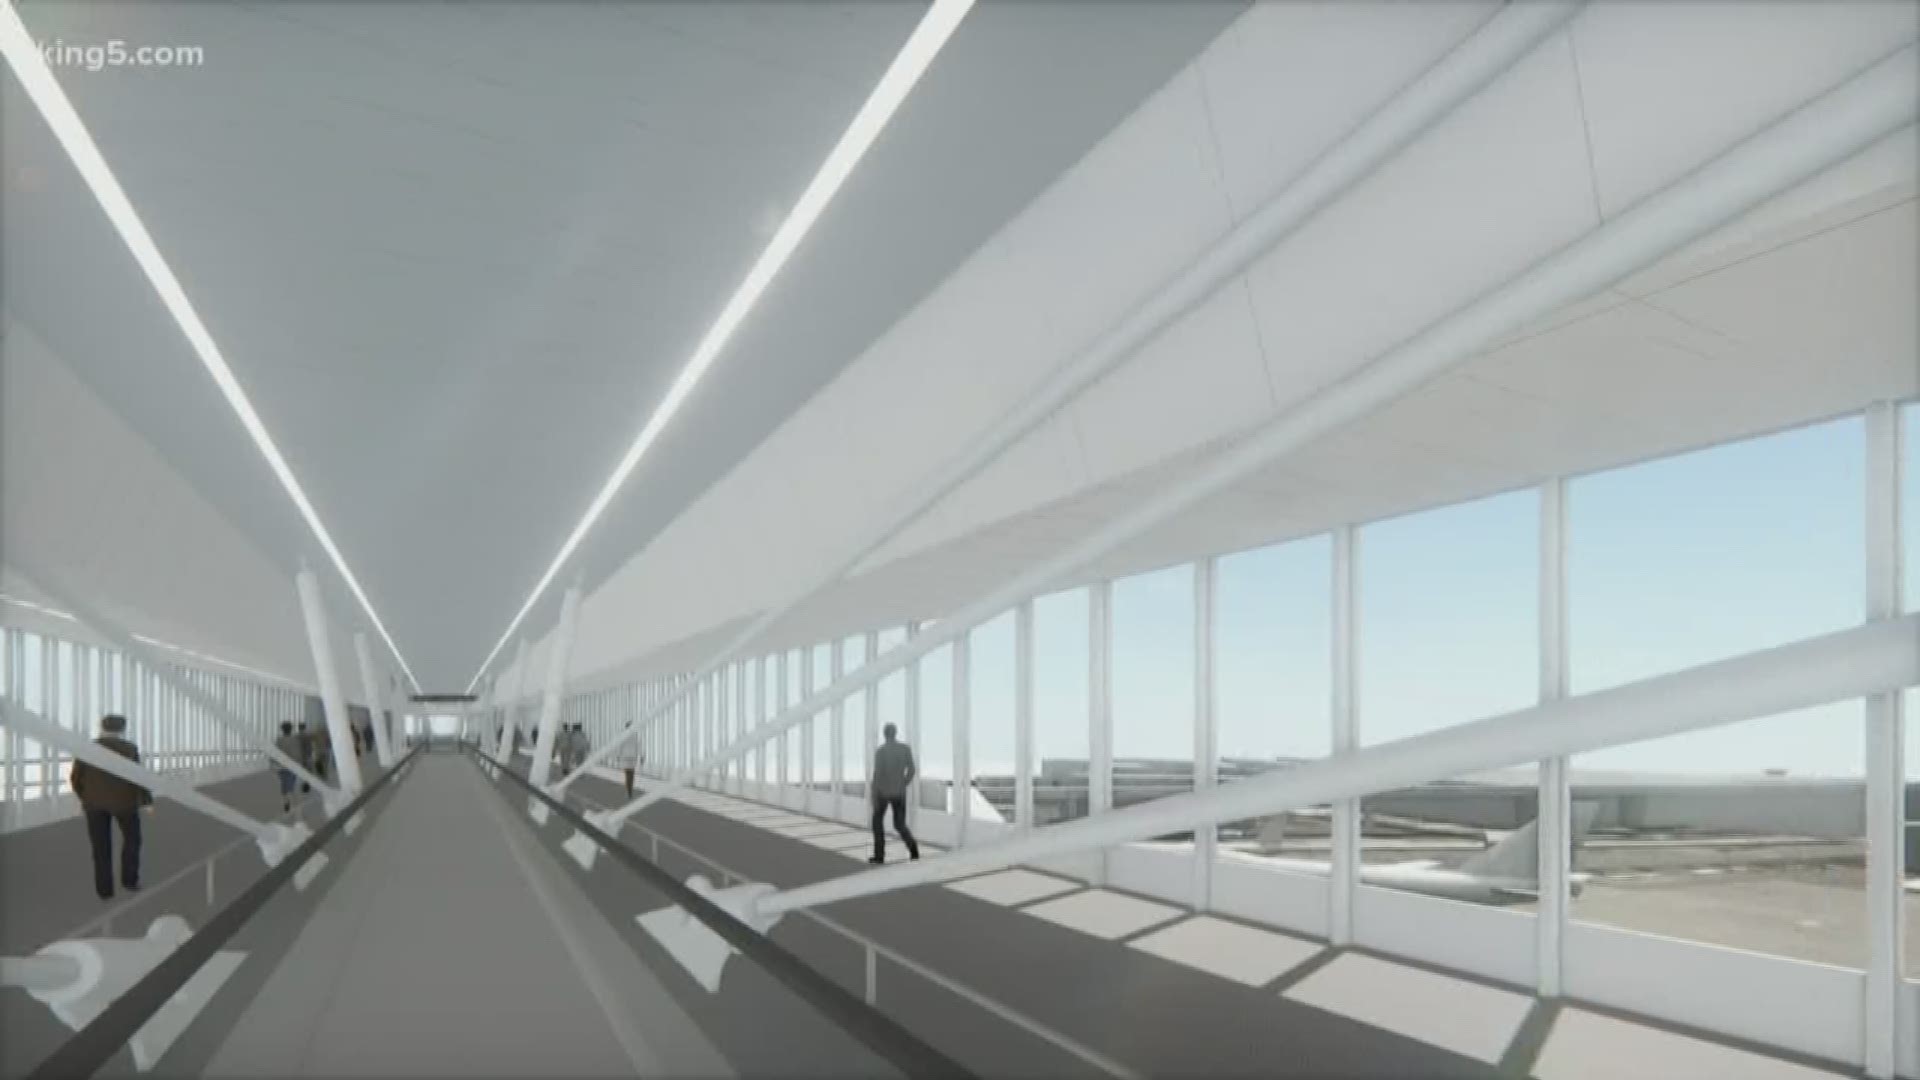 If you are a regular user of our region's major airport, you've seen a steady series of changes. That's all to try and catch up with massive growth. International travel alone has more than doubled over a decade. To accommodate that growth, the Port of Seattle is building something that promises to be spectacular. KING 5's Glenn Farley reports.